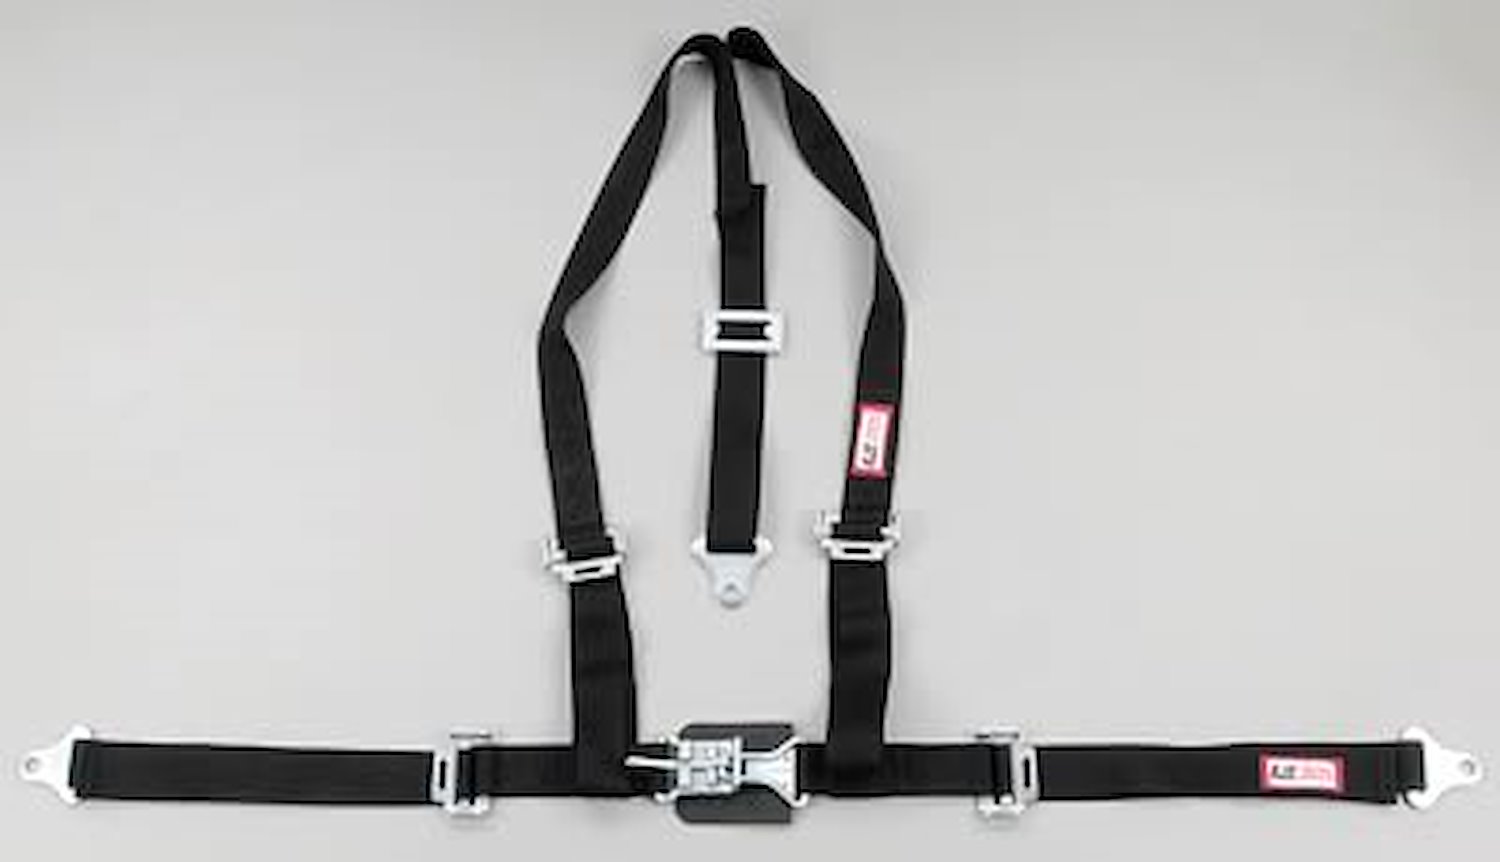 NON-SFI L&L HARNESS 3 PULL DOWN Lap Belt SNAP SEWN IN 2 S.H. Individual FLOOR Mount w/STERNUM STRAP WRAP/SNAP BLUE